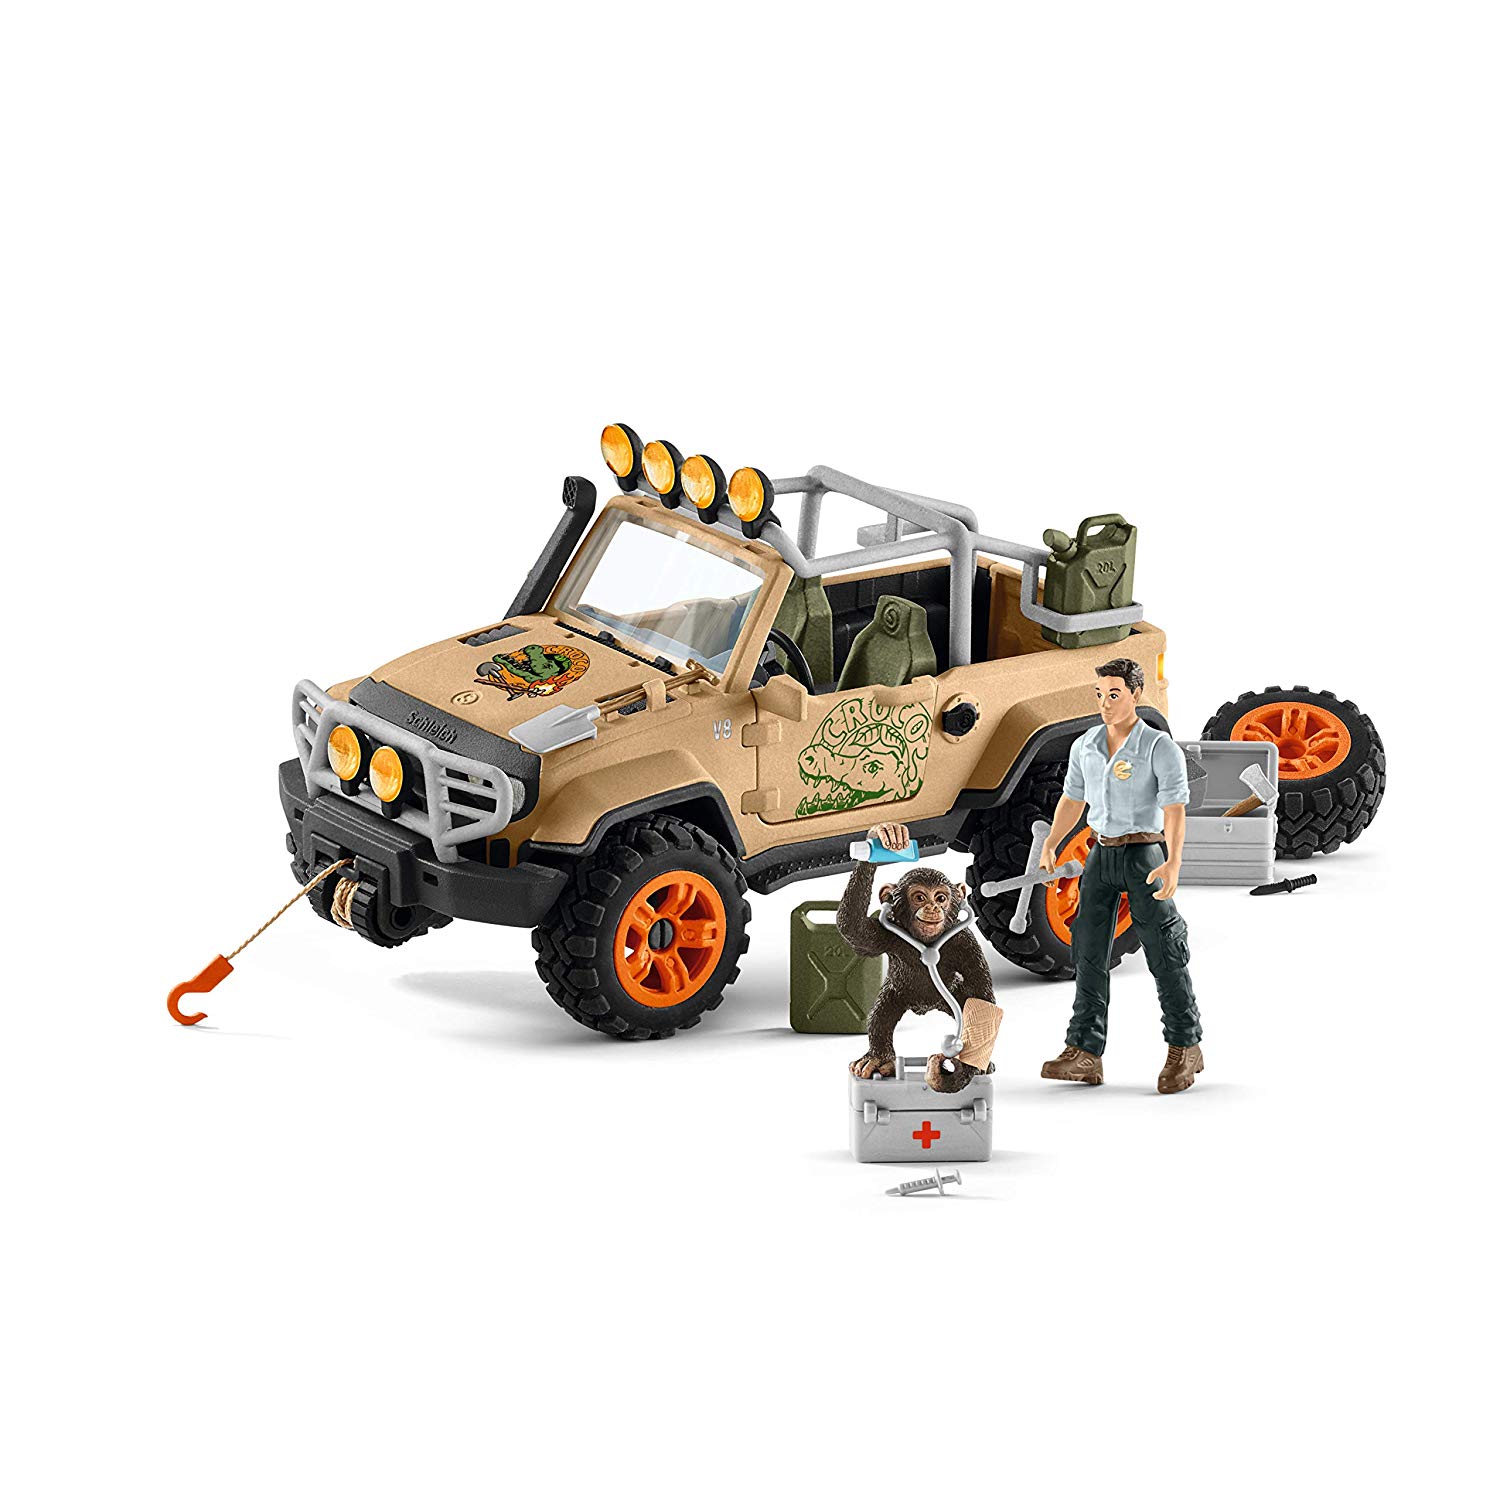 Product Image - Schleich 42410 Off Roader 4x4 Vehicle with Winch - Wild Life